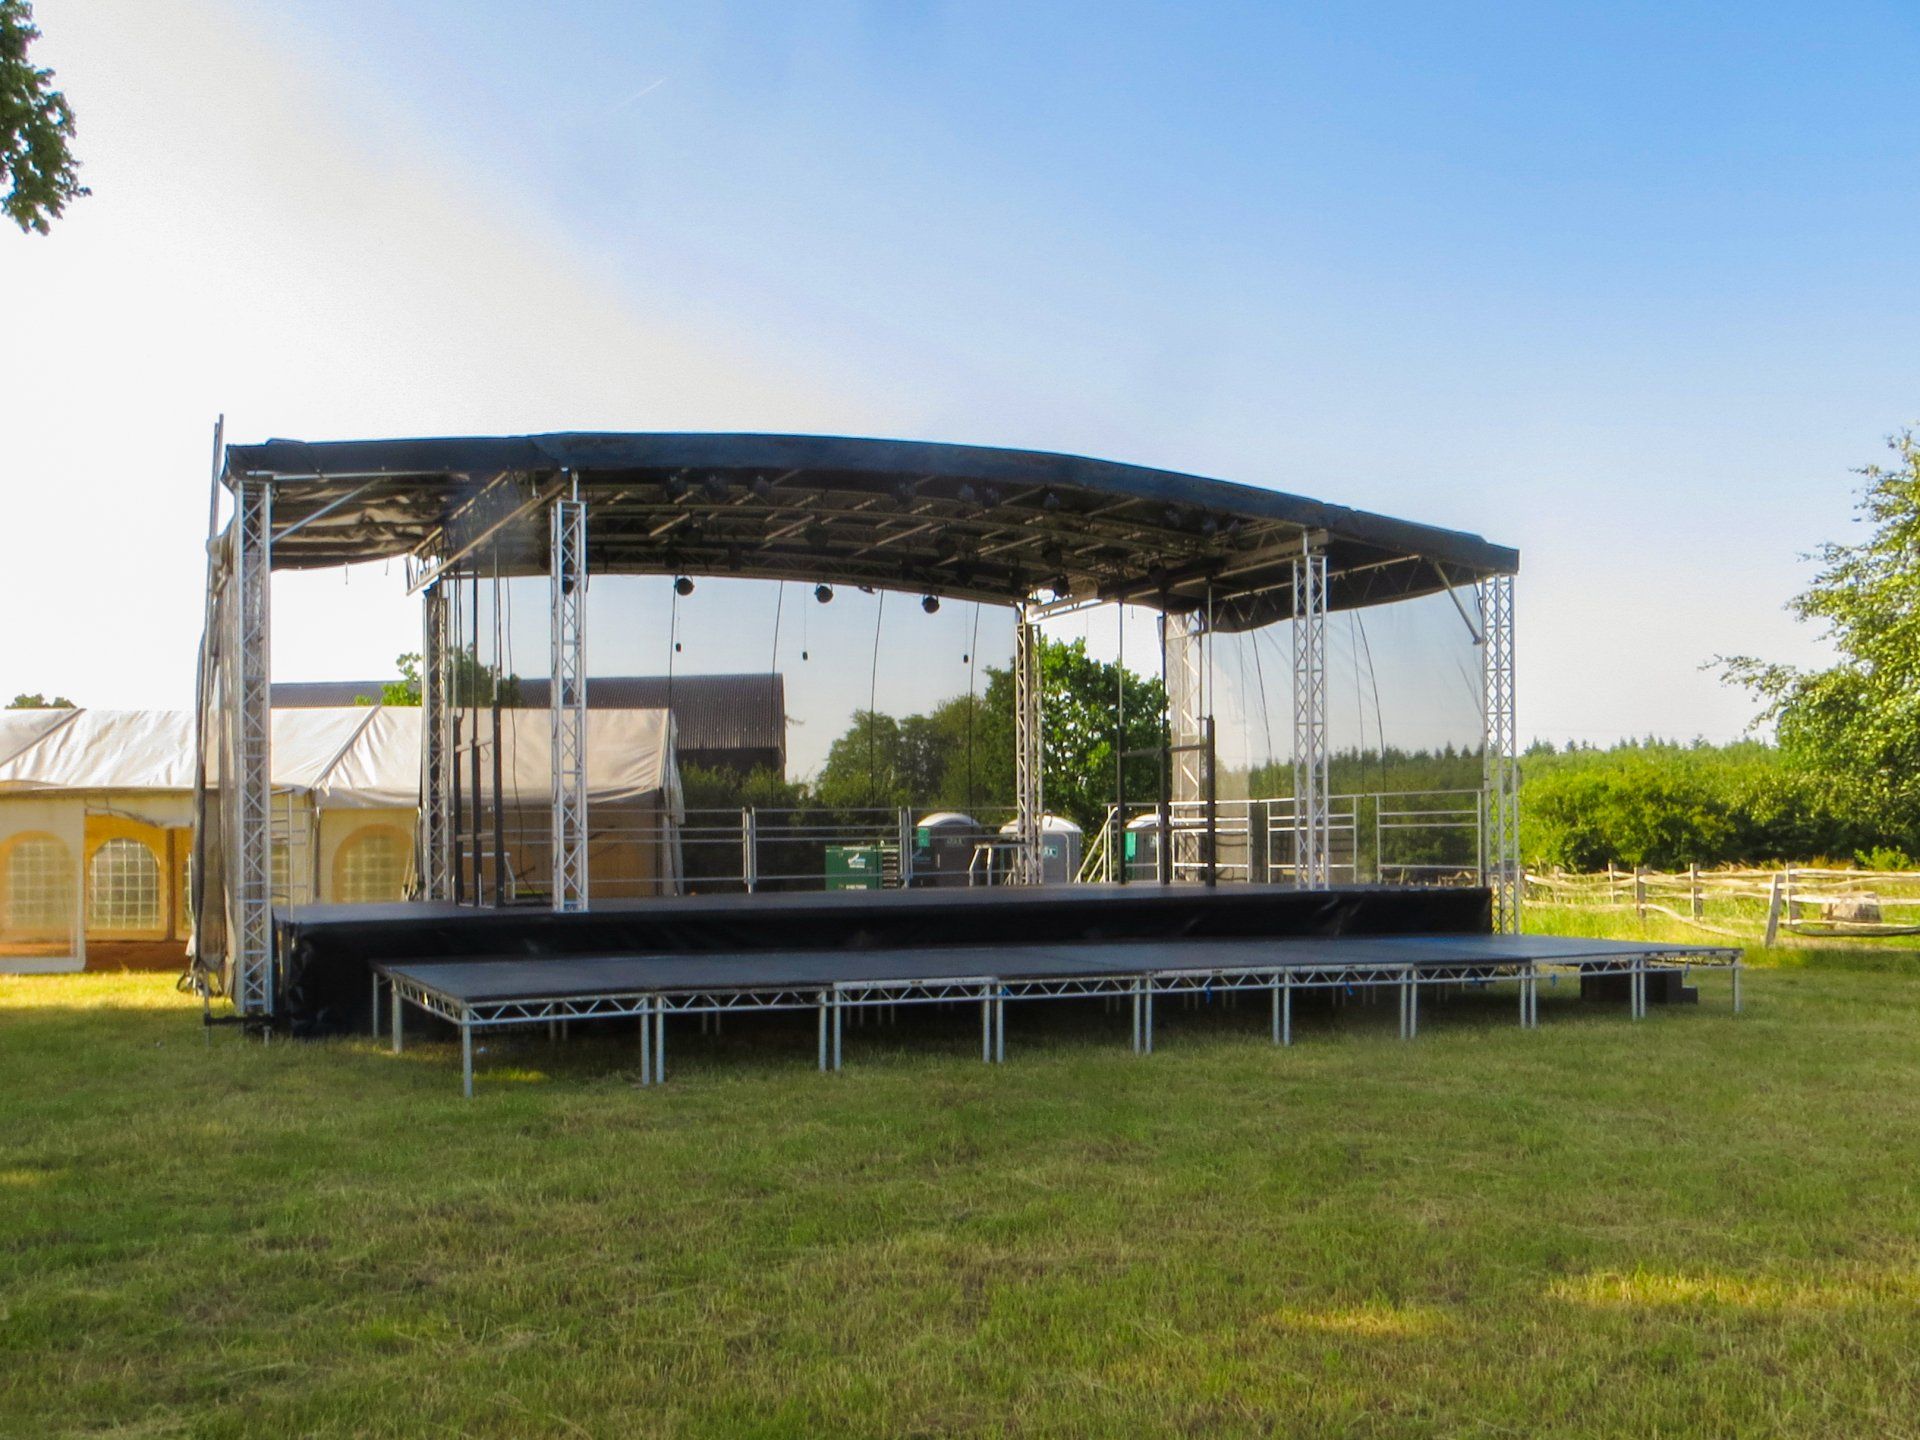 Extra large trailer stage set up for an outdoor event